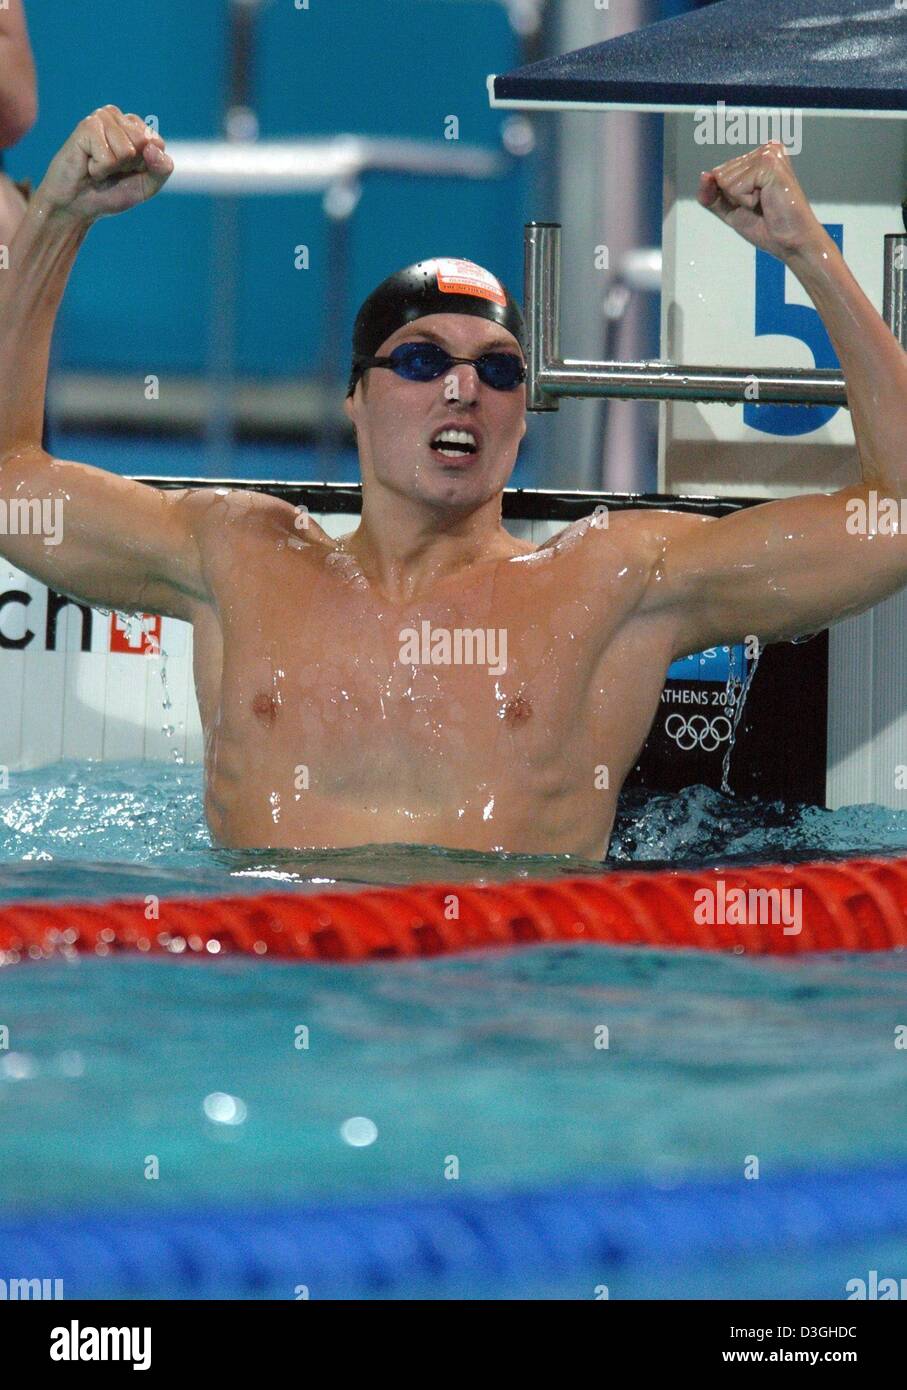 Dpa Dutch Swimmer Pieter Van Den Hoogenband Cheers After Taking Gold In The Men S 100m Freestyle Final At The Olympic Aquatic Centre In Athens Greece 18 August 2004 Stock Photo Alamy